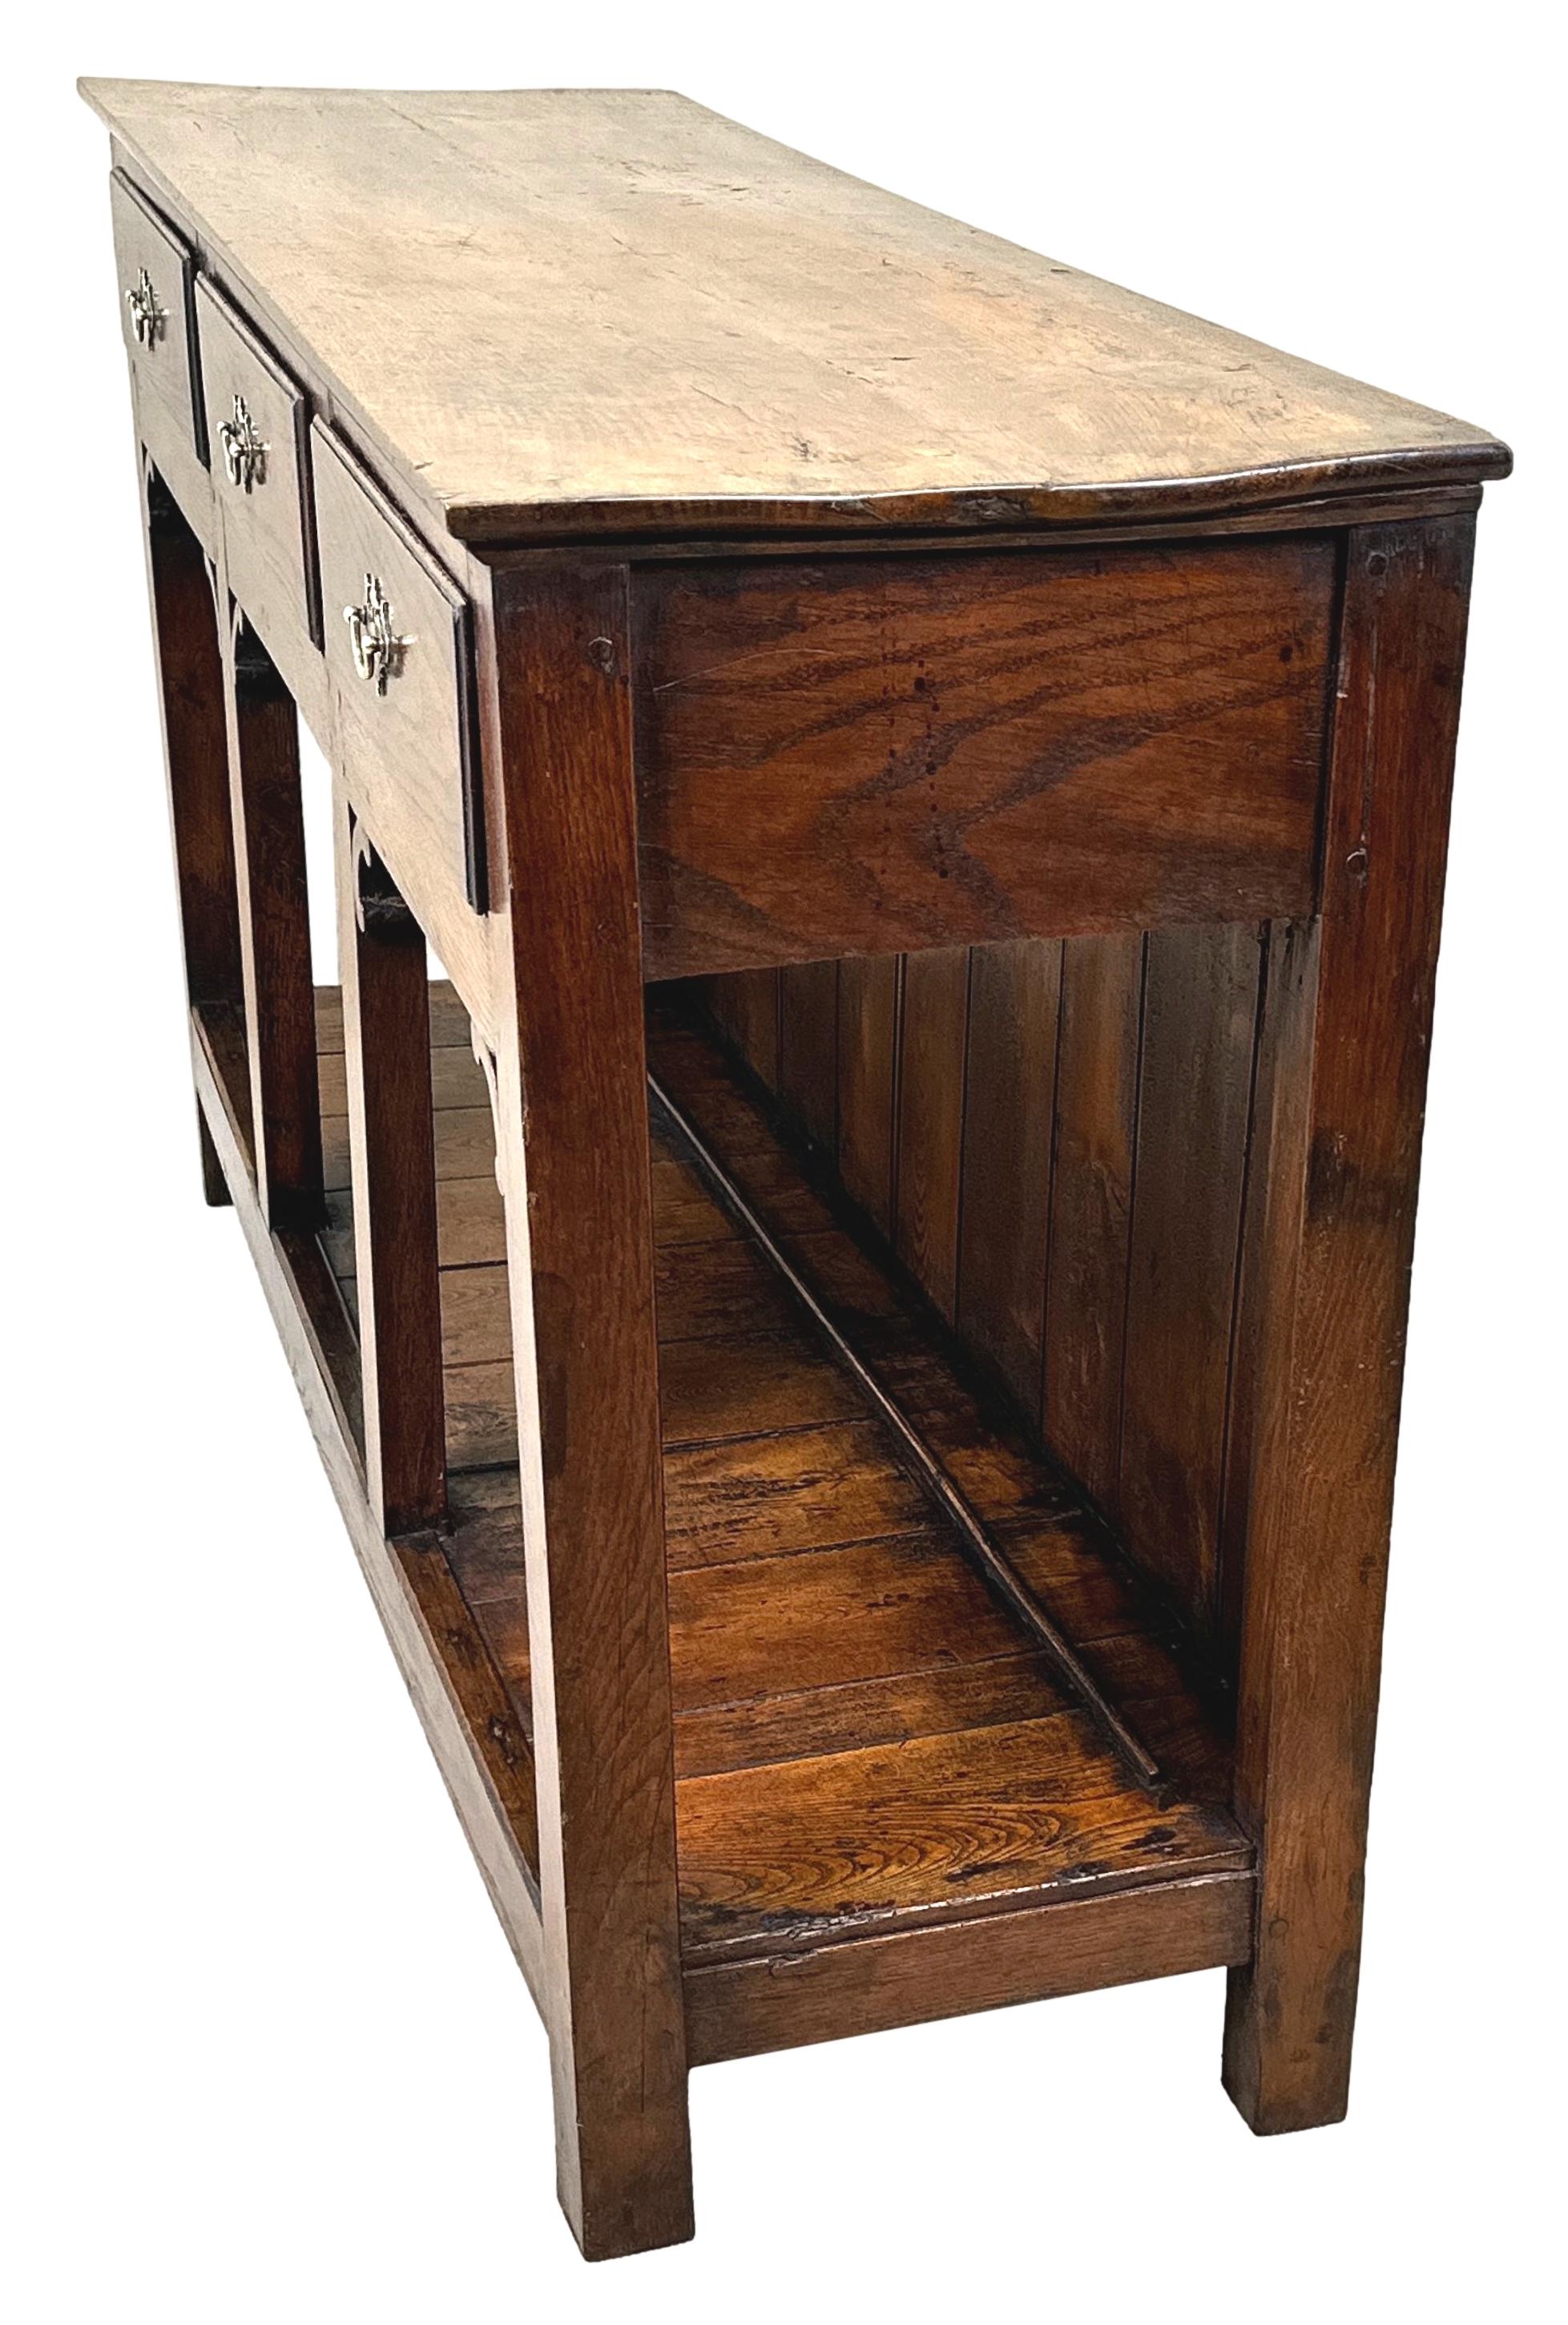 A Very Attractive 18th Century, George III Period Oak Dresser Base, Of Unusual Small Proportions, Having Well Figured Rectangular Top Over Three Frieze Drawers, With Replacement Brass Plate Handles, Raised On Elegant Square Upright Supports With